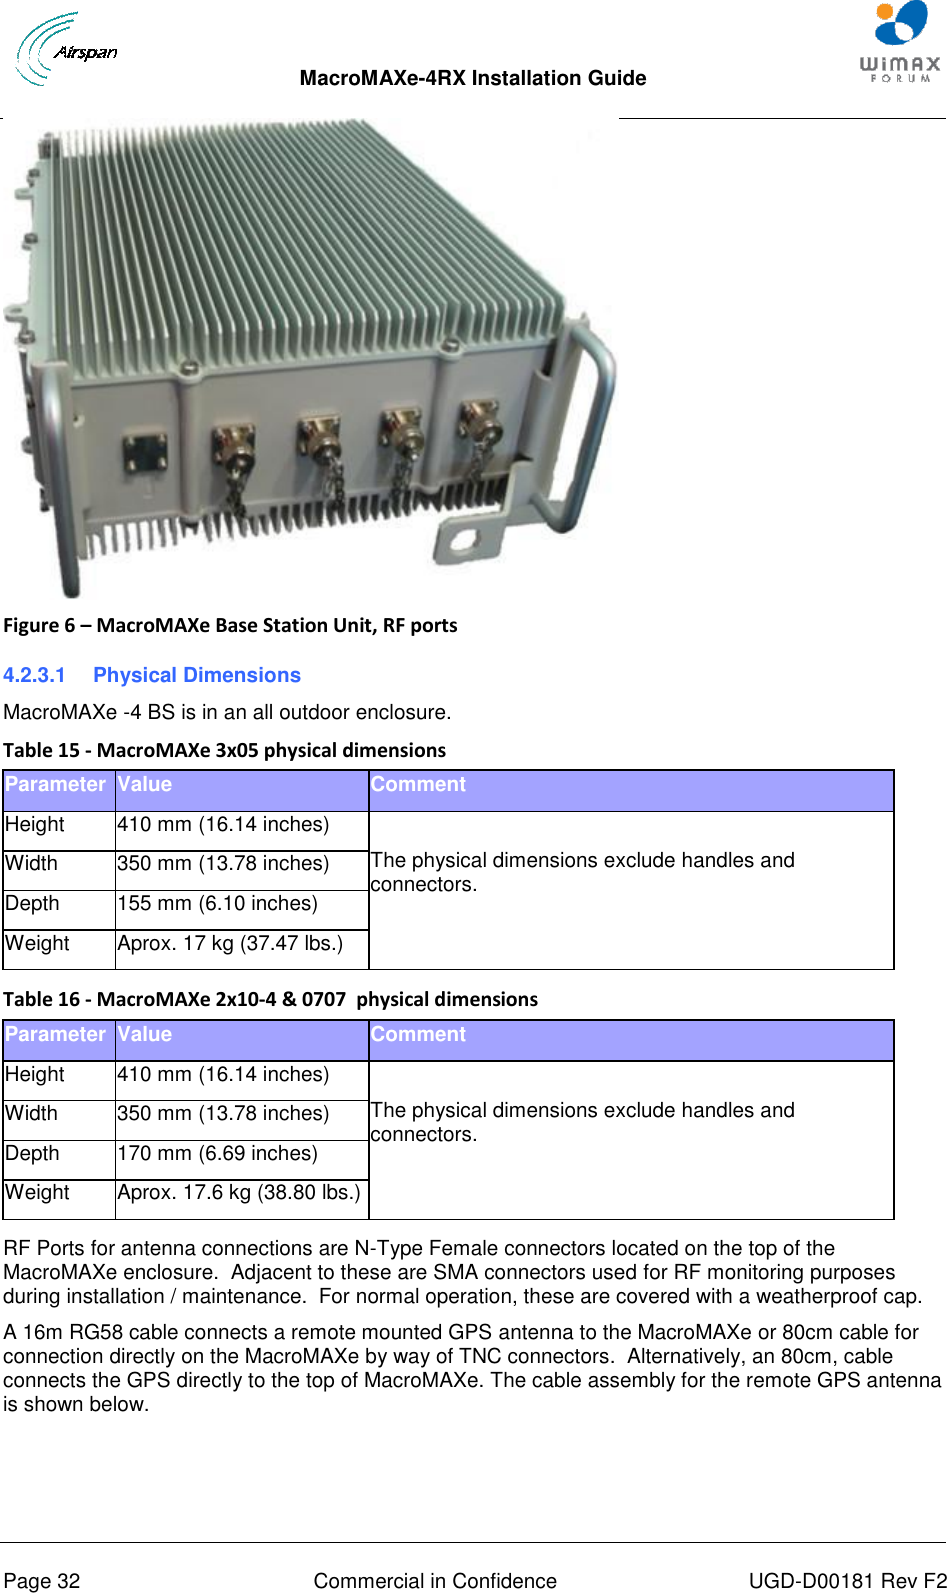  MacroMAXe-4RX Installation Guide       Page 32  Commercial in Confidence  UGD-D00181 Rev F2  Figure 6 – MacroMAXe Base Station Unit, RF ports 4.2.3.1  Physical Dimensions MacroMAXe -4 BS is in an all outdoor enclosure. Table 15 - MacroMAXe 3x05 physical dimensions Parameter Value Comment Height 410 mm (16.14 inches)  The physical dimensions exclude handles and connectors. Width 350 mm (13.78 inches) Depth 155 mm (6.10 inches) Weight Aprox. 17 kg (37.47 lbs.)  Table 16 - MacroMAXe 2x10-4 &amp; 0707  physical dimensions Parameter Value Comment Height 410 mm (16.14 inches)  The physical dimensions exclude handles and connectors. Width 350 mm (13.78 inches) Depth 170 mm (6.69 inches) Weight Aprox. 17.6 kg (38.80 lbs.)  RF Ports for antenna connections are N-Type Female connectors located on the top of the MacroMAXe enclosure.  Adjacent to these are SMA connectors used for RF monitoring purposes during installation / maintenance.  For normal operation, these are covered with a weatherproof cap. A 16m RG58 cable connects a remote mounted GPS antenna to the MacroMAXe or 80cm cable for connection directly on the MacroMAXe by way of TNC connectors.  Alternatively, an 80cm, cable connects the GPS directly to the top of MacroMAXe. The cable assembly for the remote GPS antenna is shown below.  